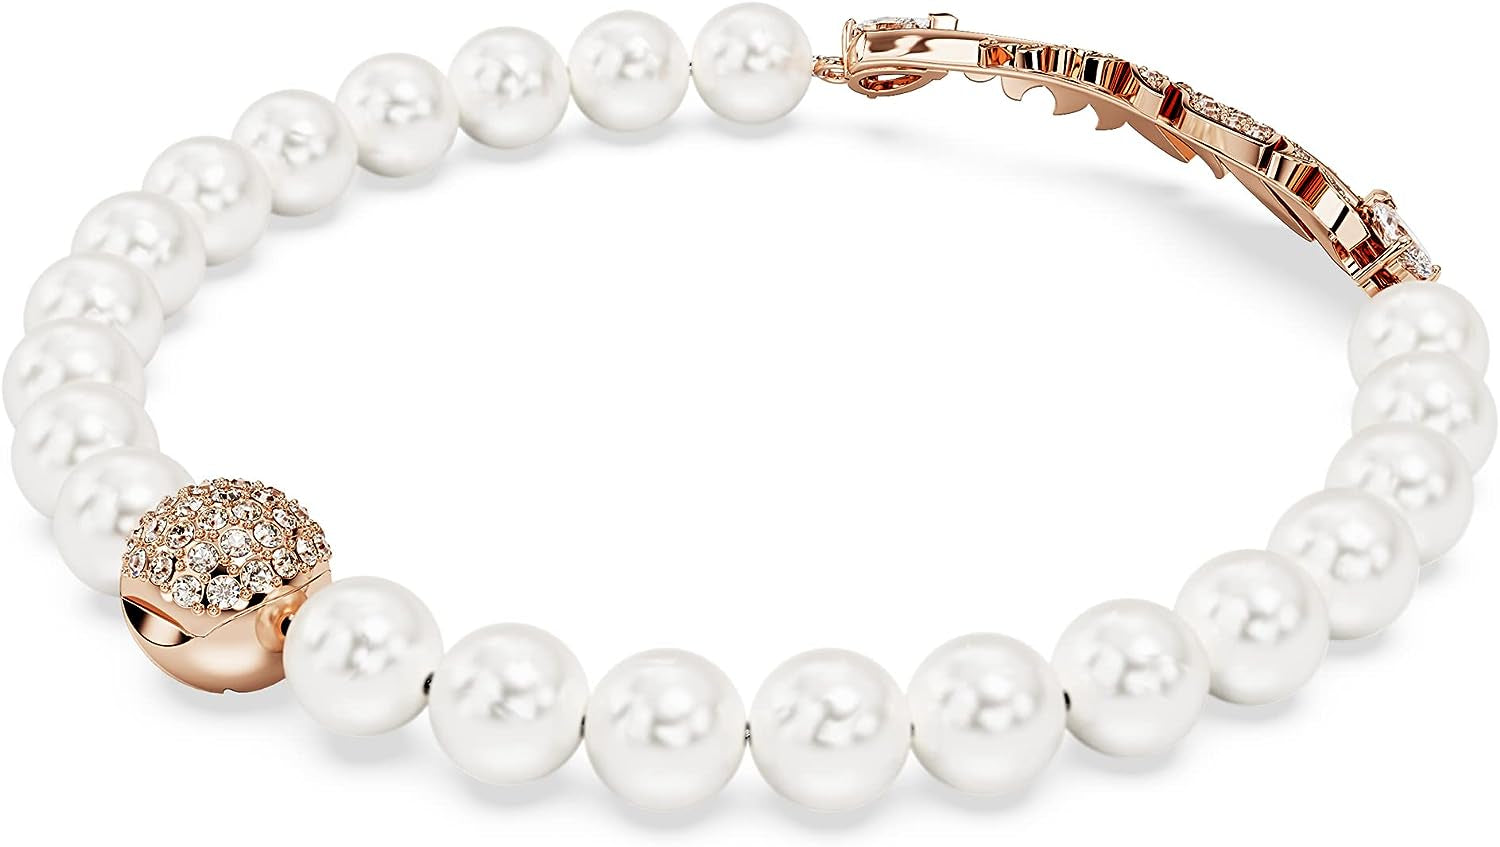 Crystal Pearls with Rose Gold-Tone Plated Bracelets